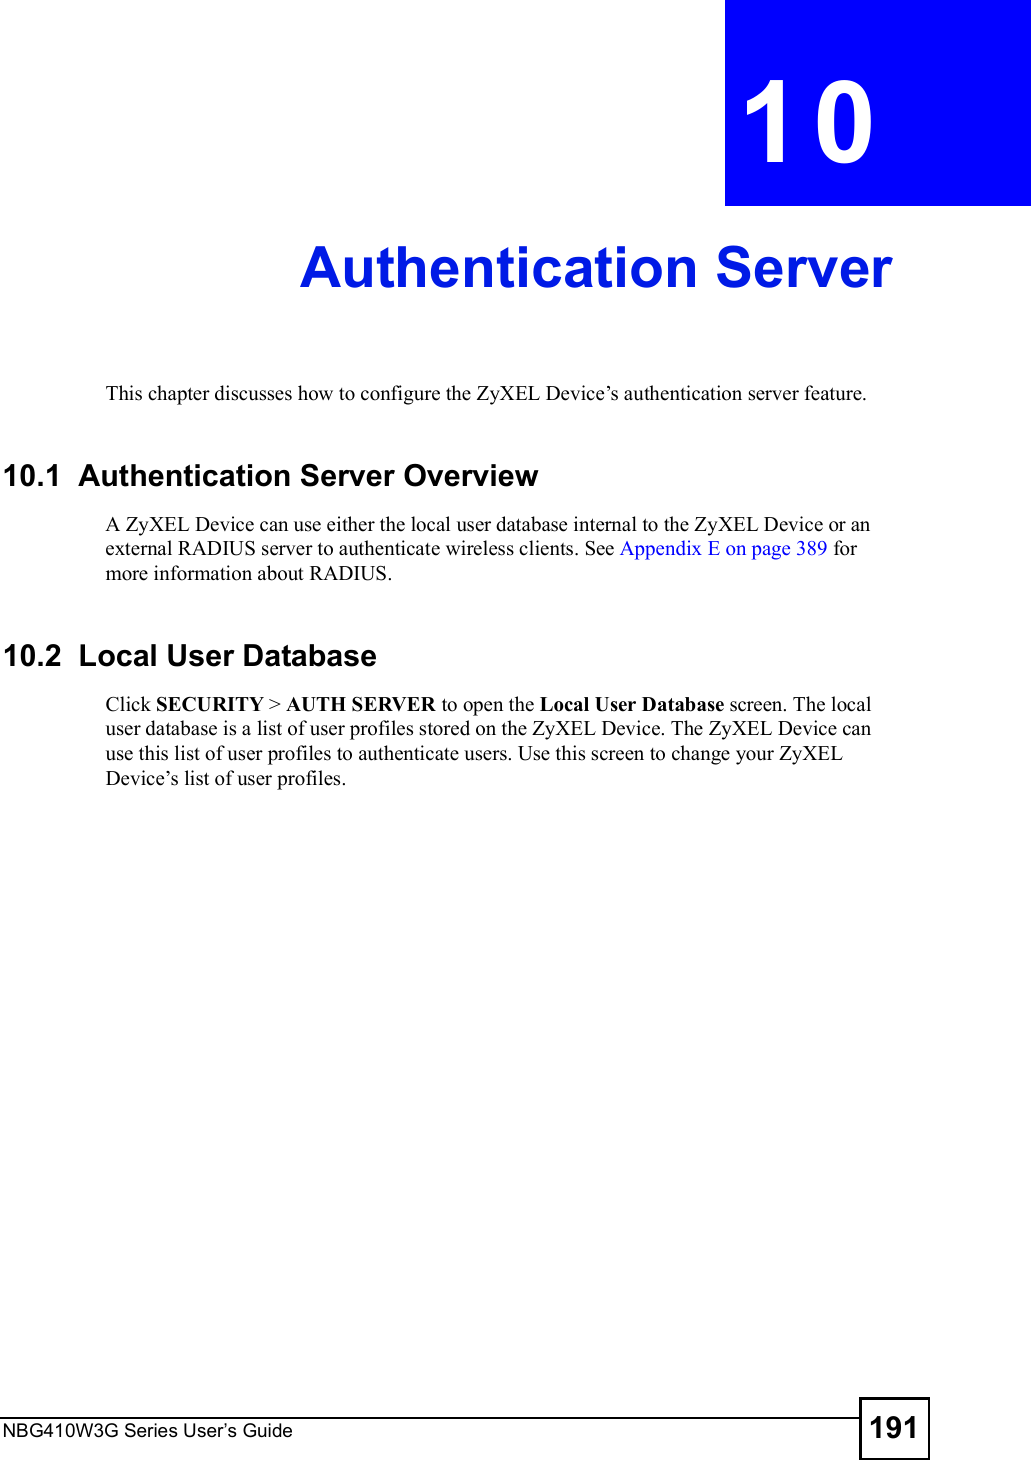 NBG410W3G Series User s Guide 191CHAPTER  10 Authentication ServerThis chapter discusses how to configure the ZyXEL Device!s authentication server feature.10.1  Authentication Server OverviewA ZyXEL Device can use either the local user database internal to the ZyXEL Device or an external RADIUS server to authenticate wireless clients. See Appendix E on page 389 for more information about RADIUS.10.2  Local User Database   Click SECURITY &gt; AUTH SERVER to open the Local User Database screen. The local user database is a list of user profiles stored on the ZyXEL Device. The ZyXEL Device can use this list of user profiles to authenticate users. Use this screen to change your ZyXEL Device!s list of user profiles. 